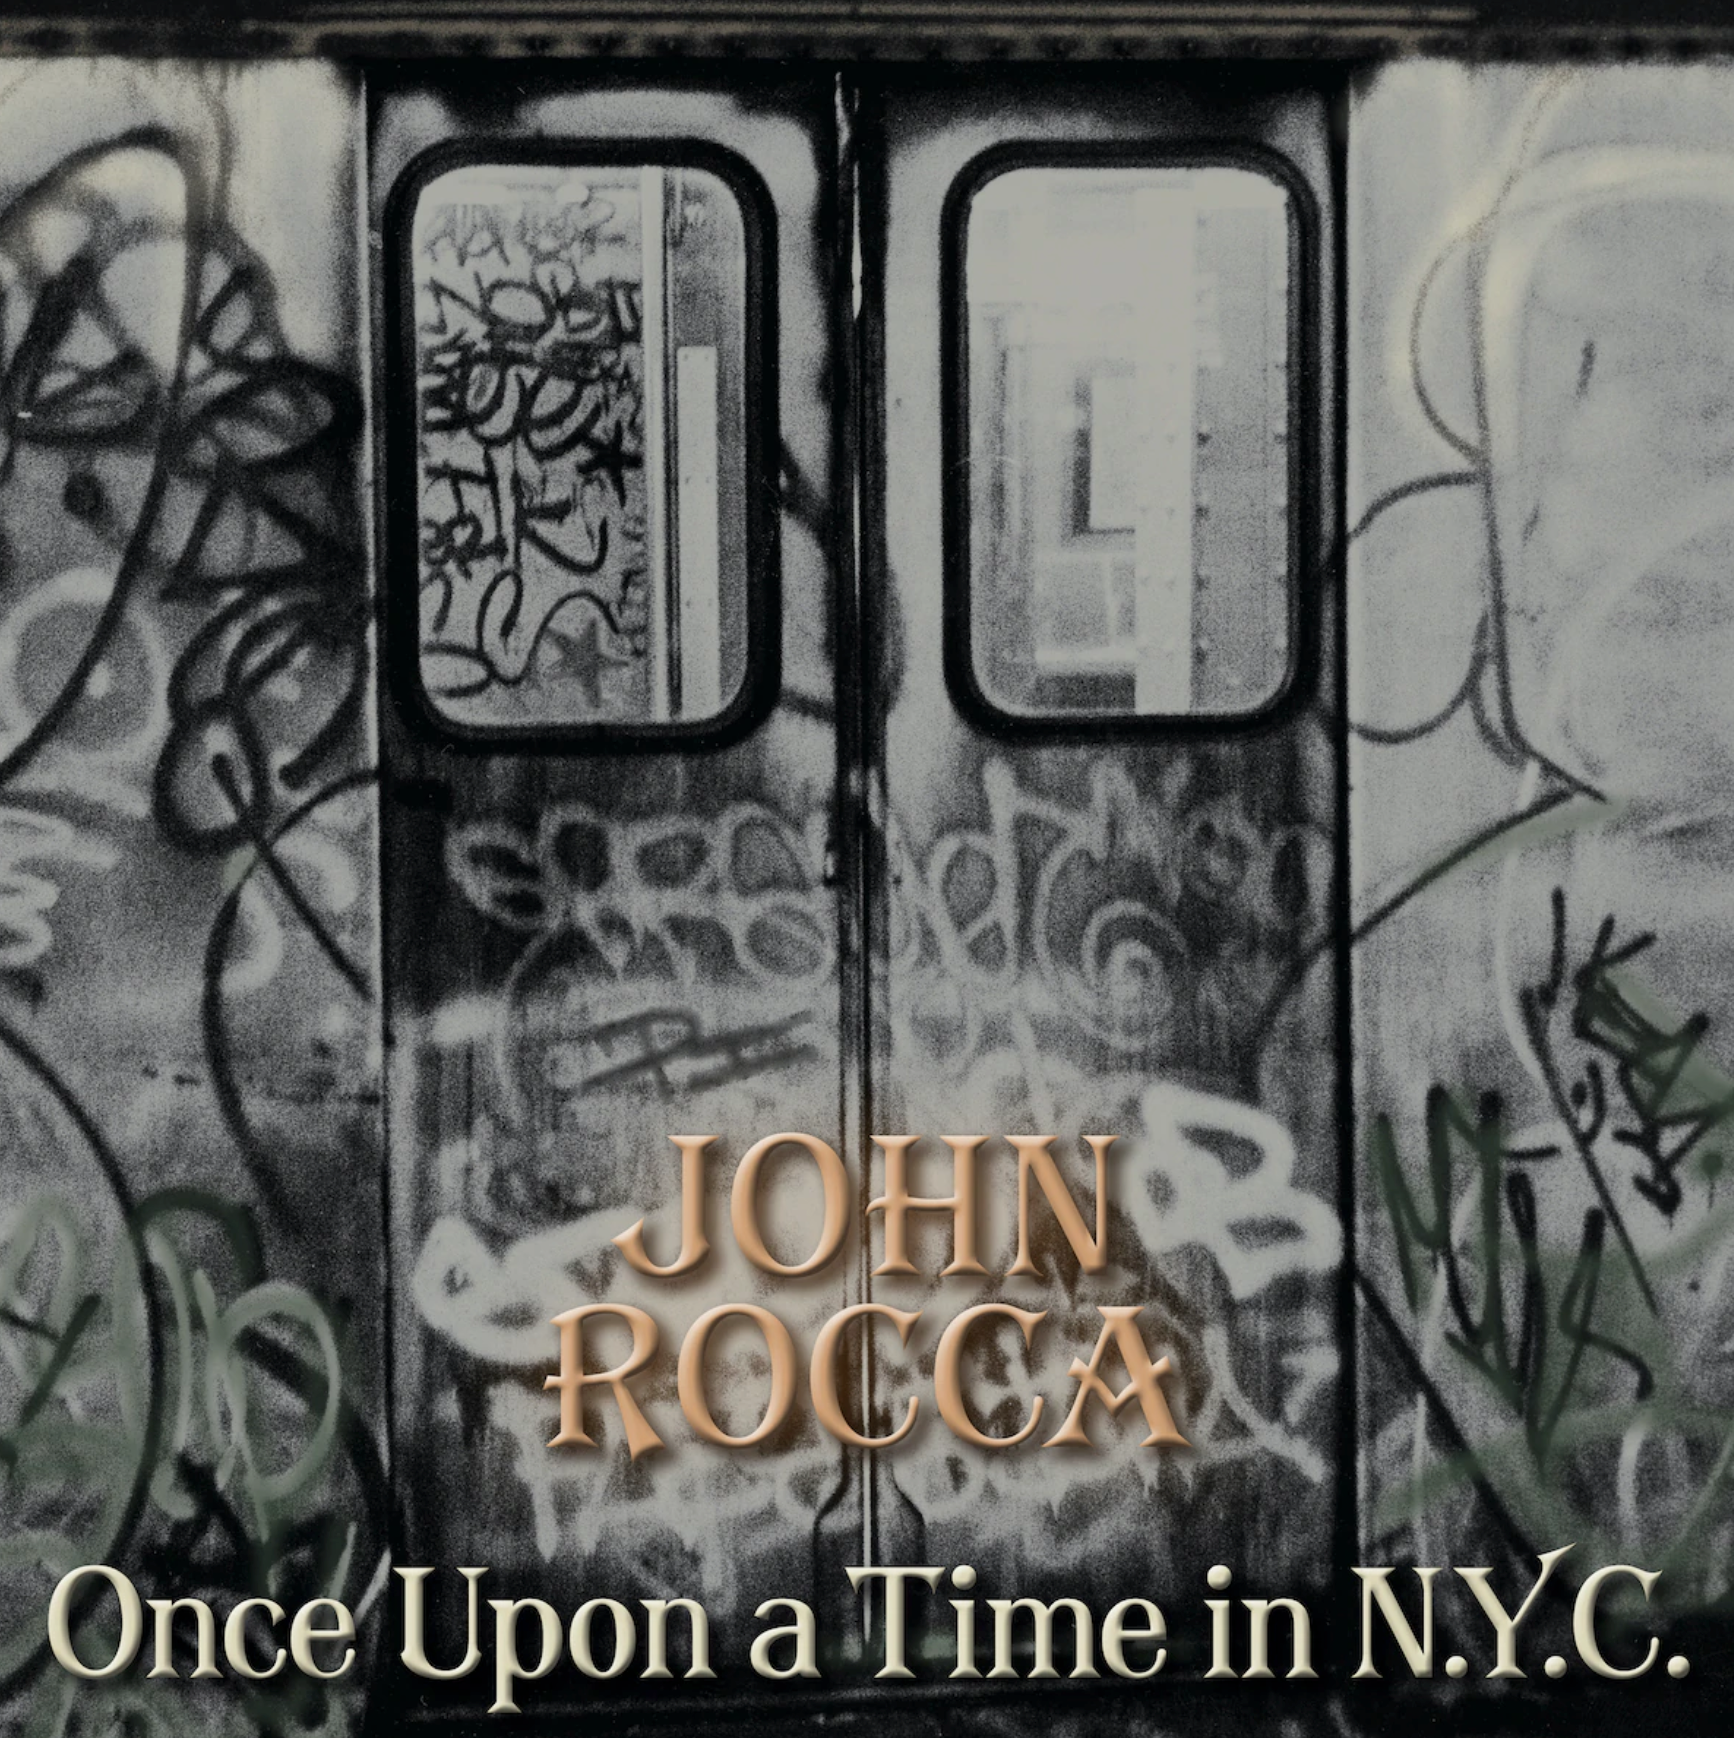 [DAMAGED] John Rocca - Once Upon A Time in N.Y.C.